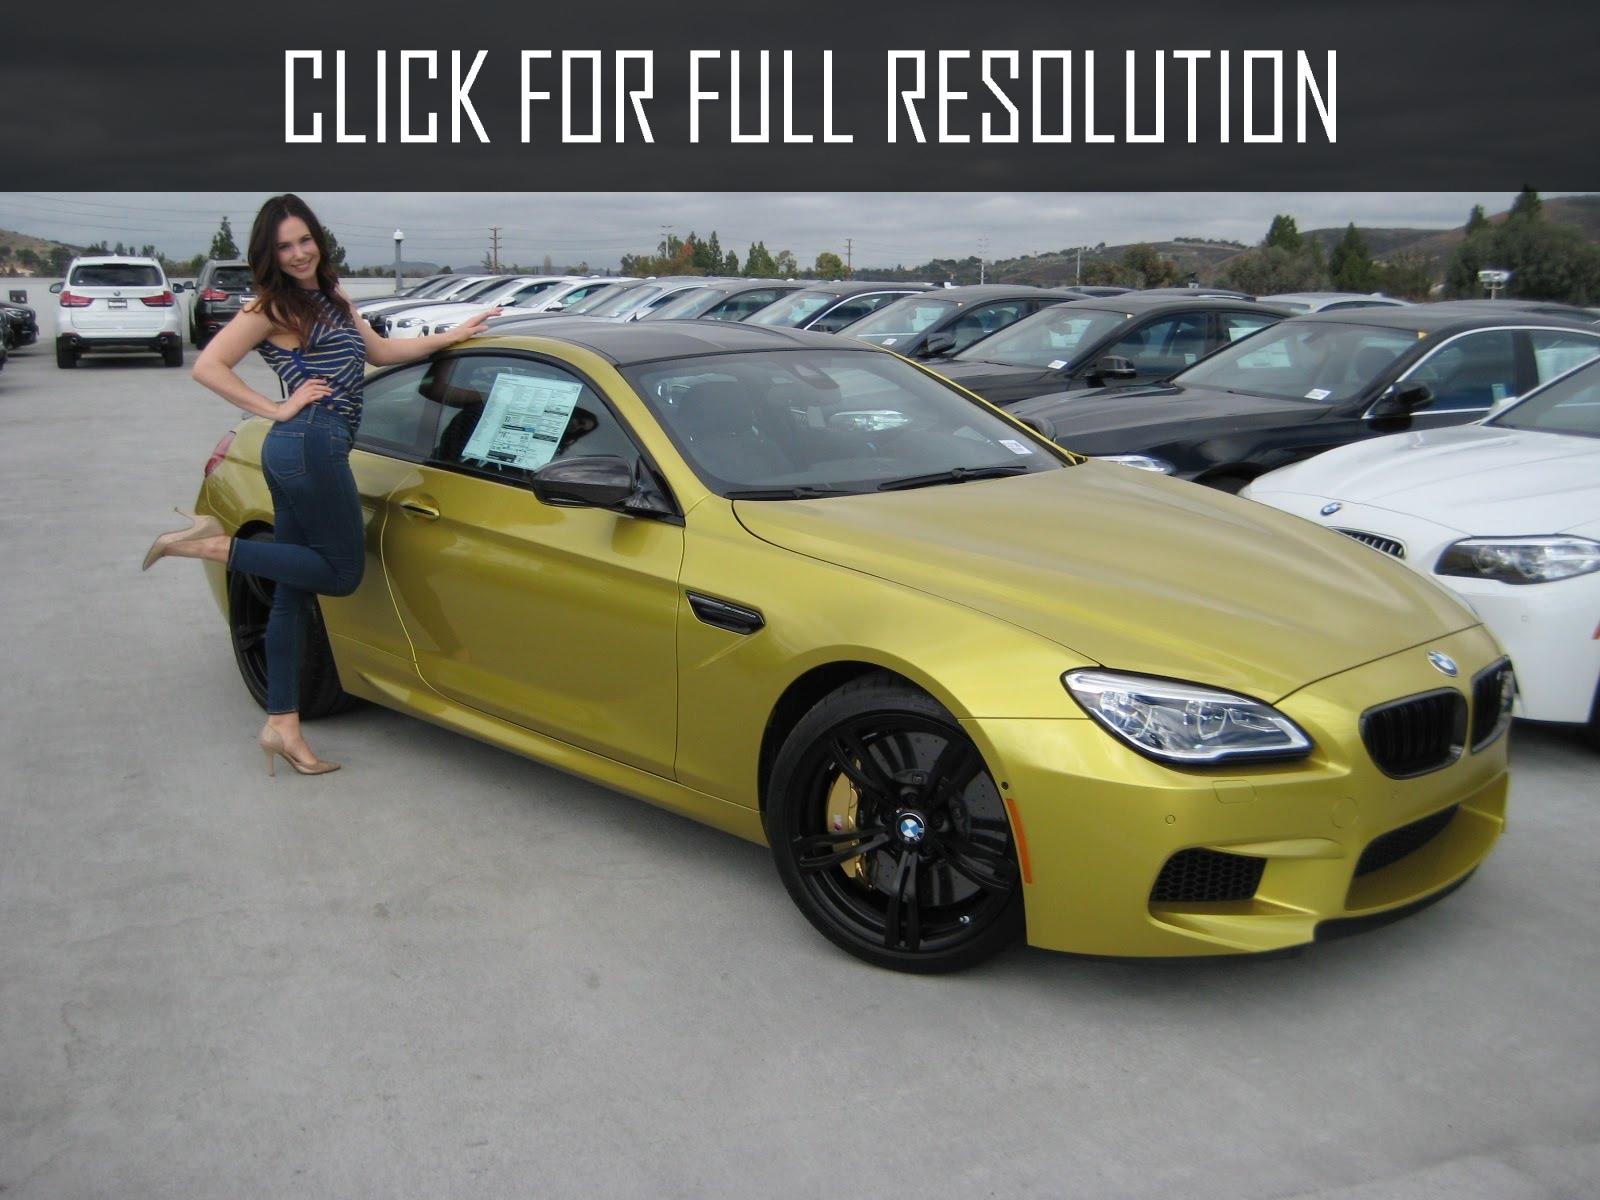 Bmw M6 Competition Edition